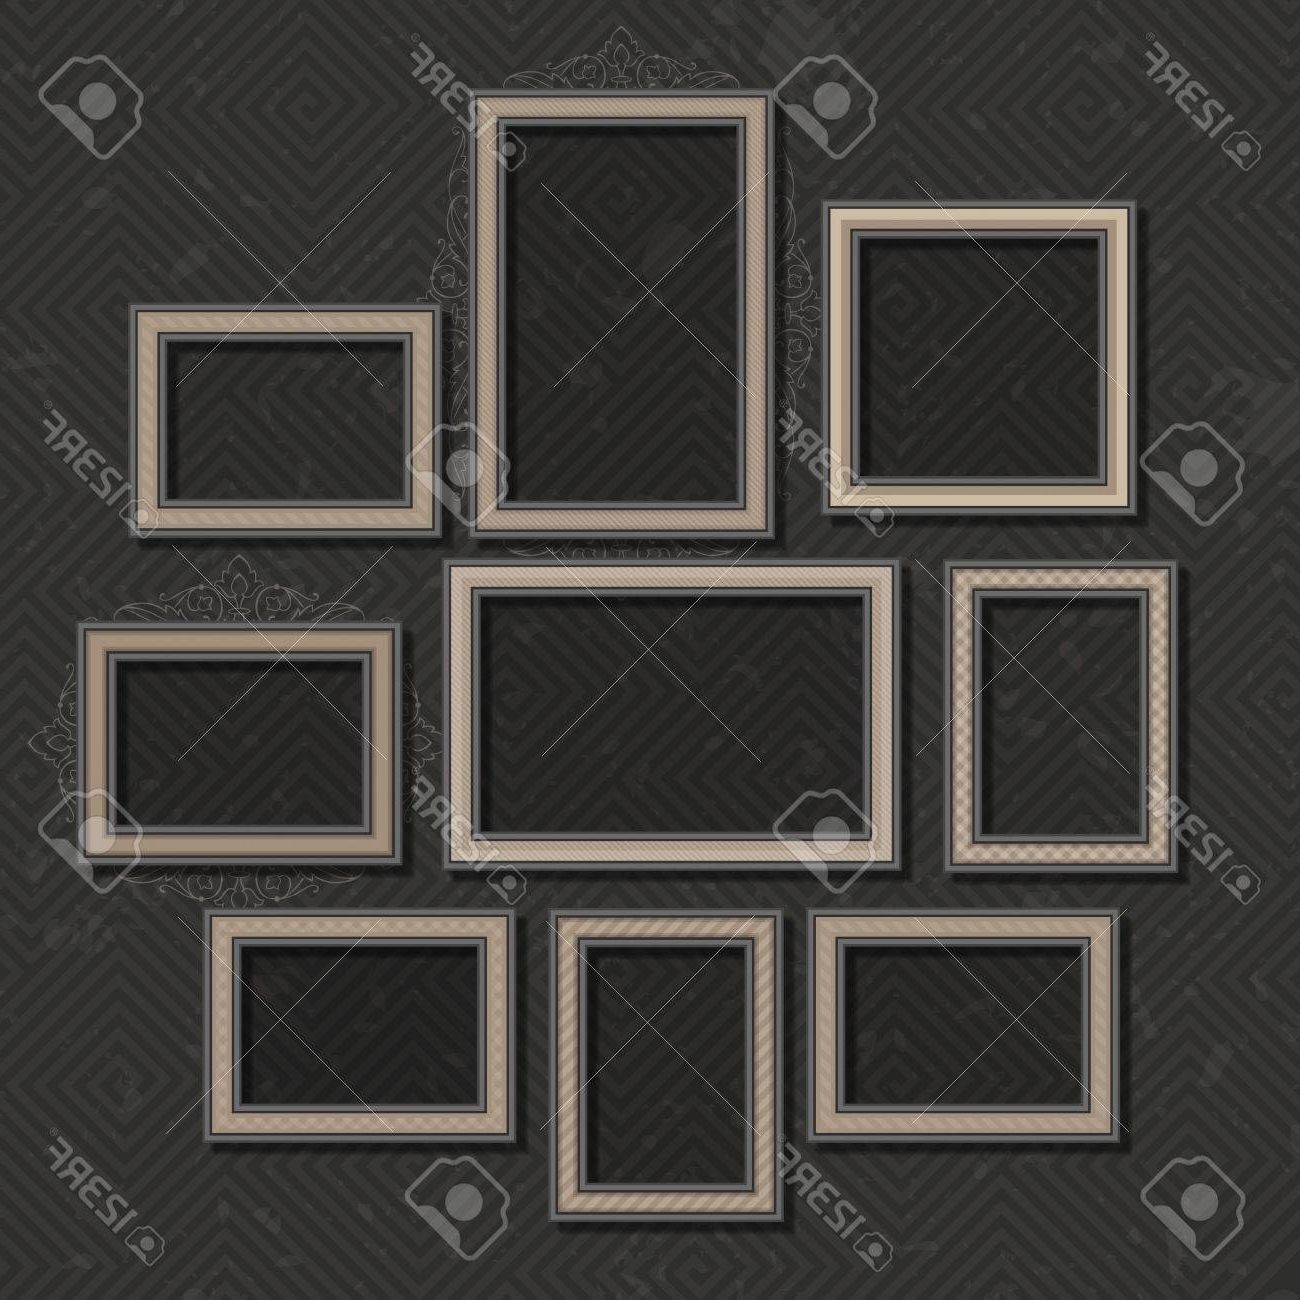 Vintage Wall Art Intended For Fashionable Picture Frame Vector.photo Art Gallery On Vintage Wall (View 13 of 15)